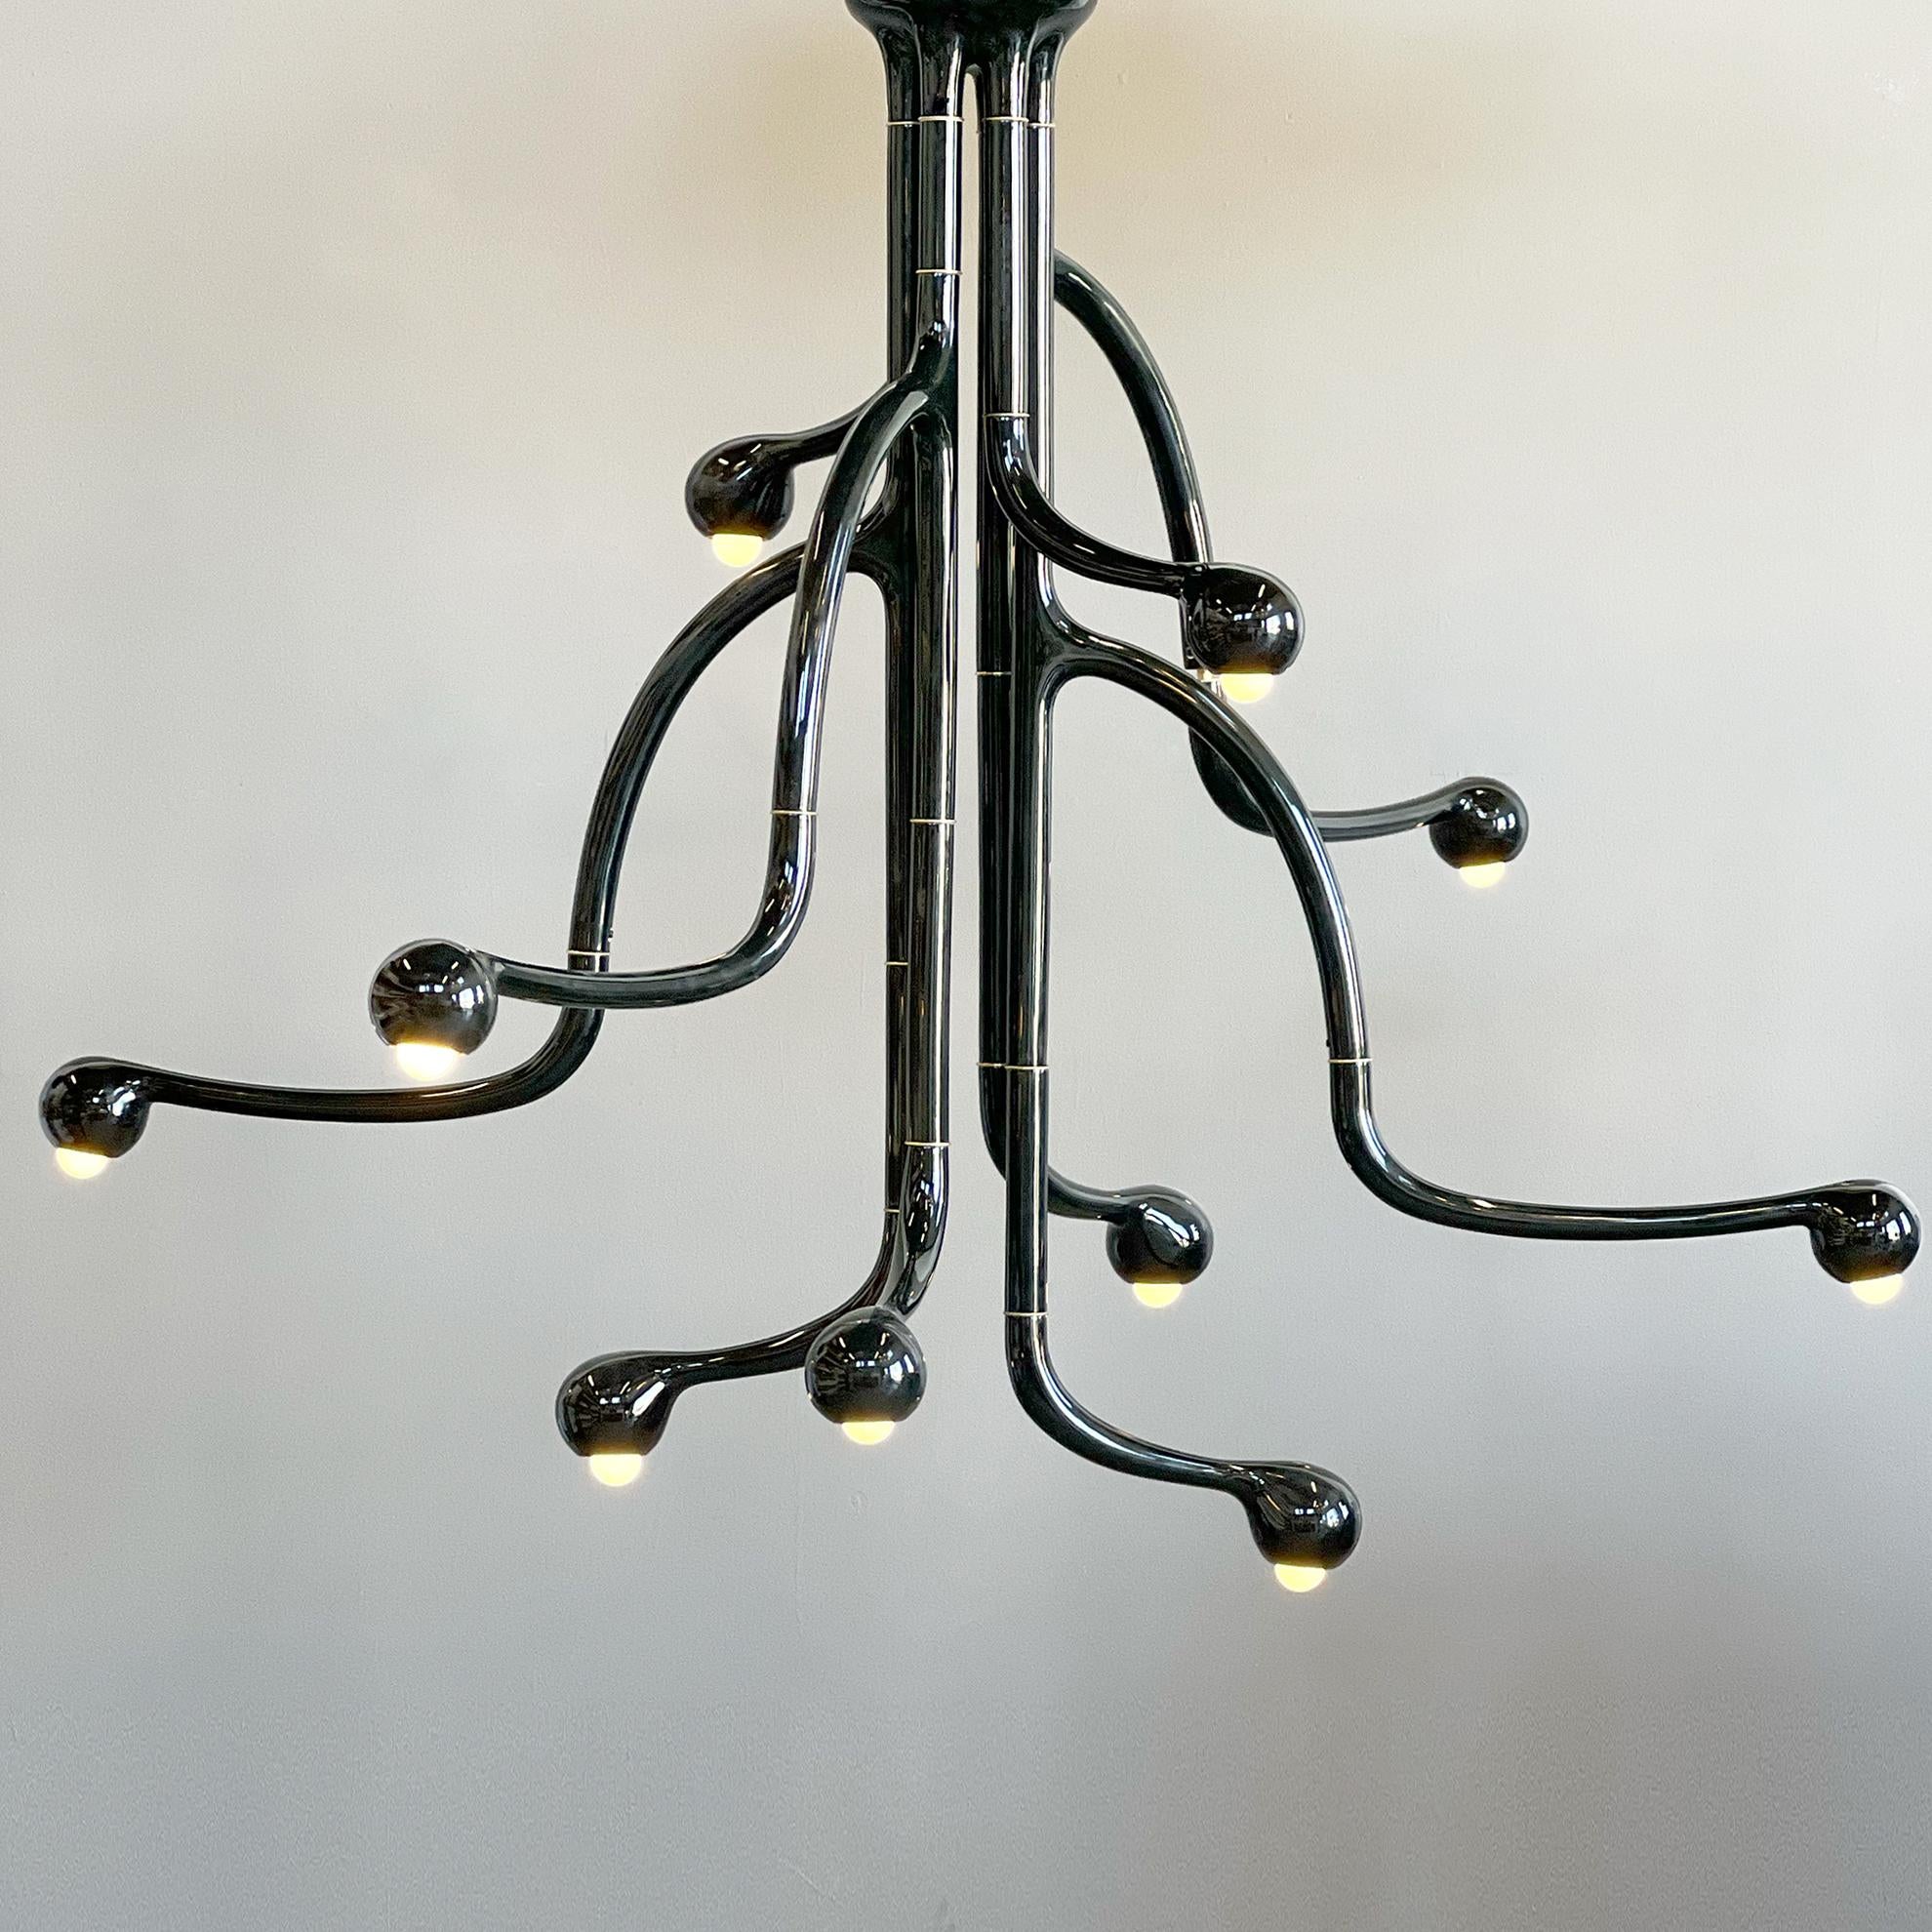 The ENTLER 10-globe chandelier is made-to-order in any of our 25 ceramic glazed finishes. 

Founded in 2015 by Jonathan Entler, the Los Angeles based studio produces table lamps that are meticulously handcrafted by a small team of talented artisans,